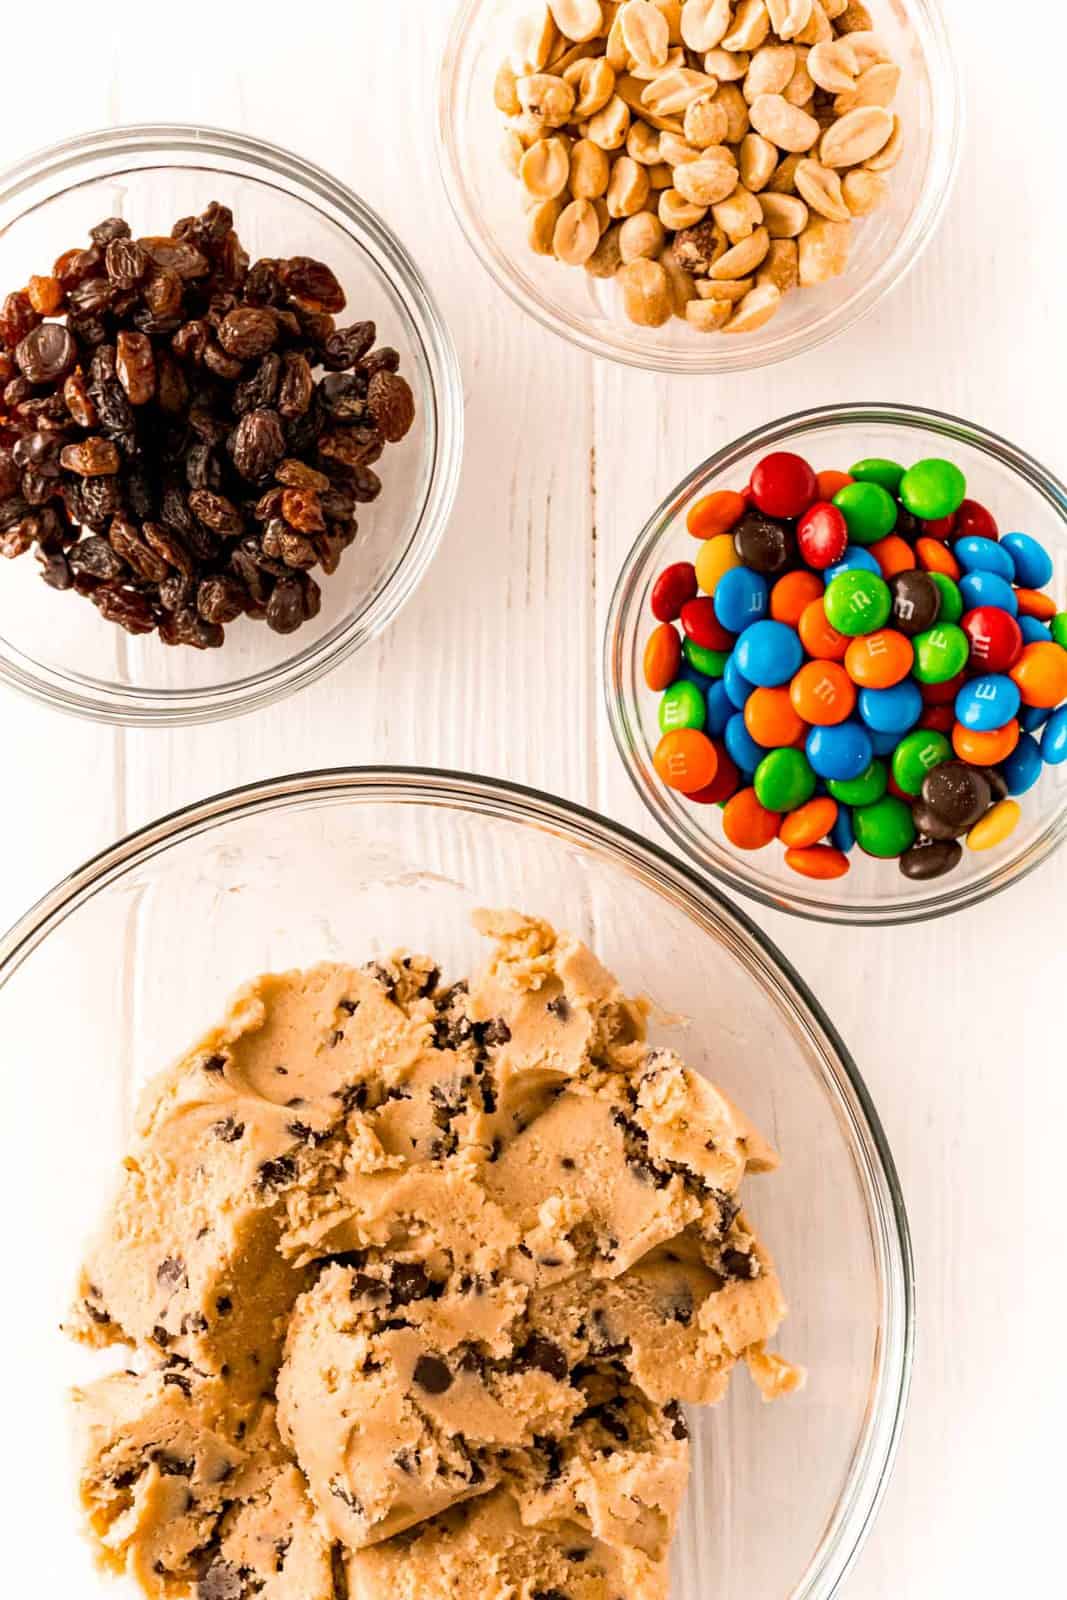 Ingredients needed: refrigerated chocolate chip cookie dough, M&M’s, salted dry roasted peanuts and raisins.